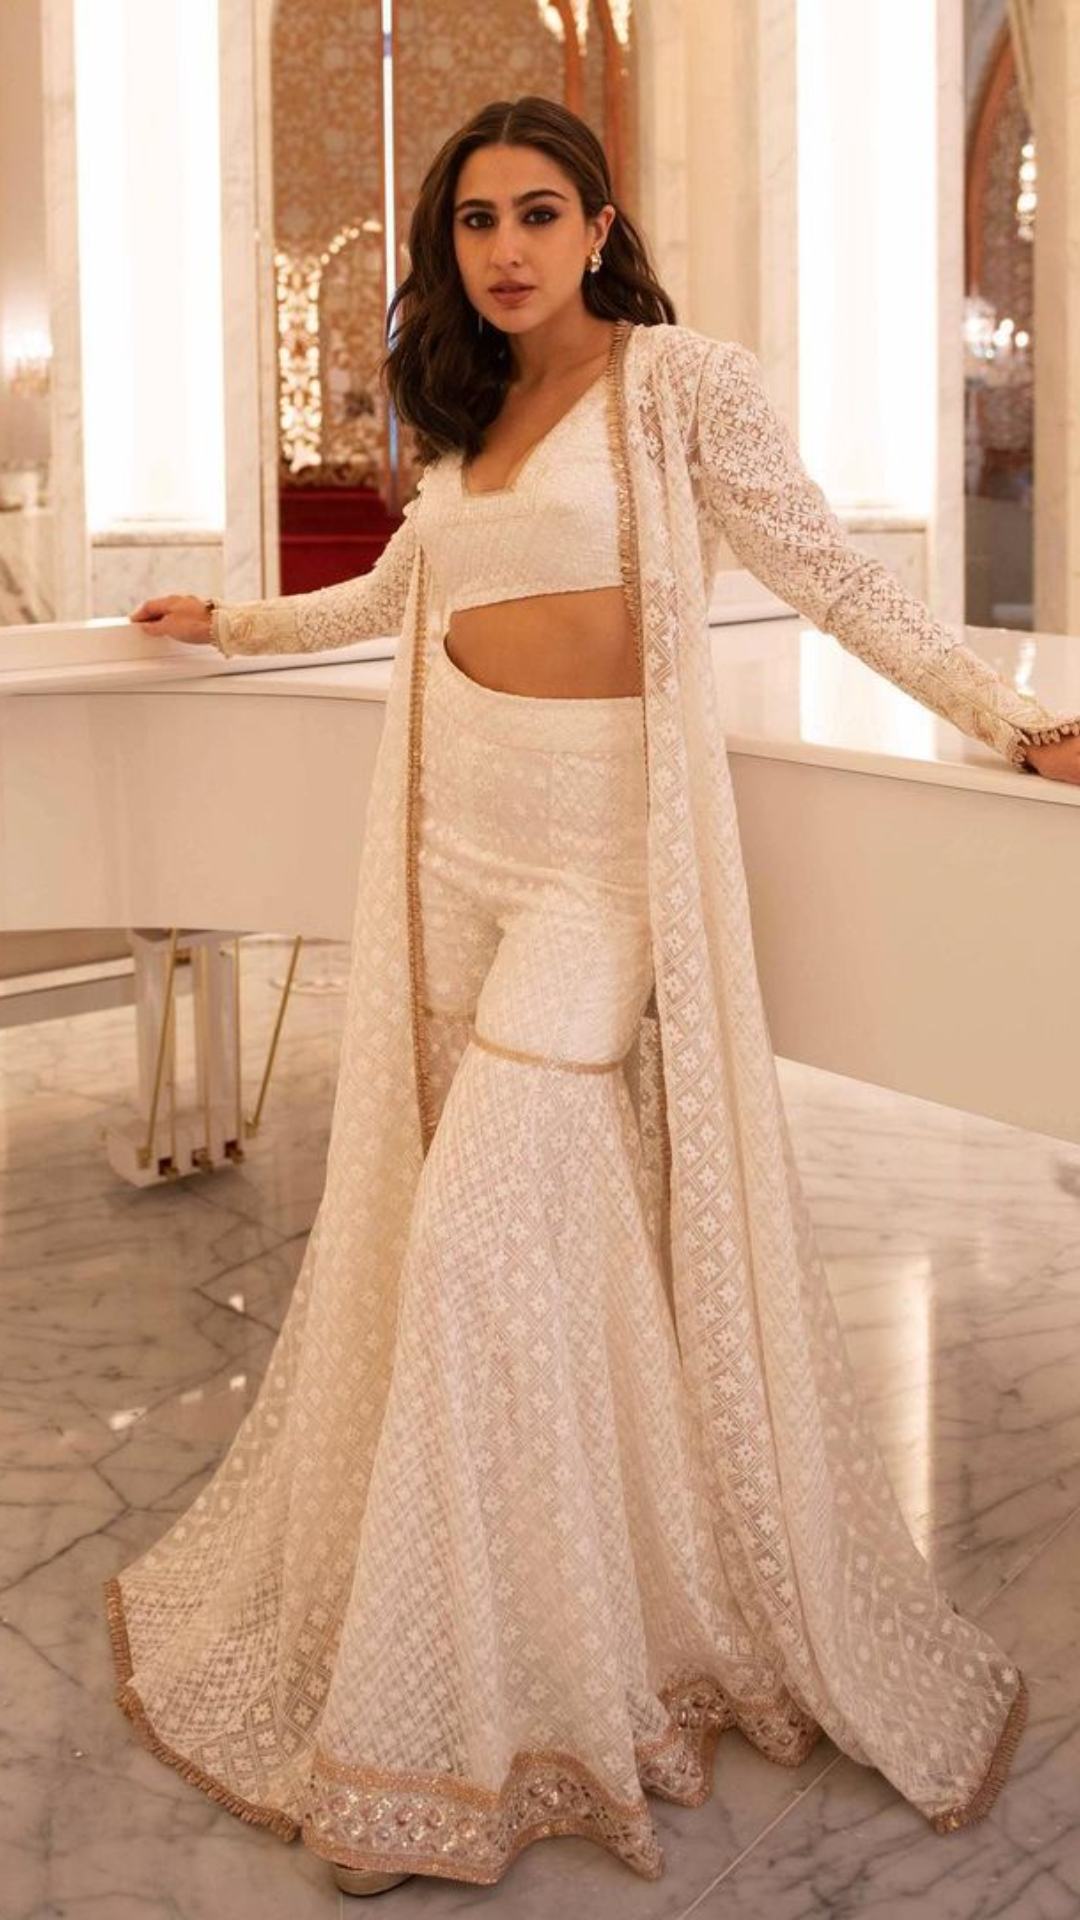 White Gown With Rama Shrug for Indian Wedding Ceremony and Party Wear Gown  in USA, UK, Malaysia, South Africa, Dubai, Singapore